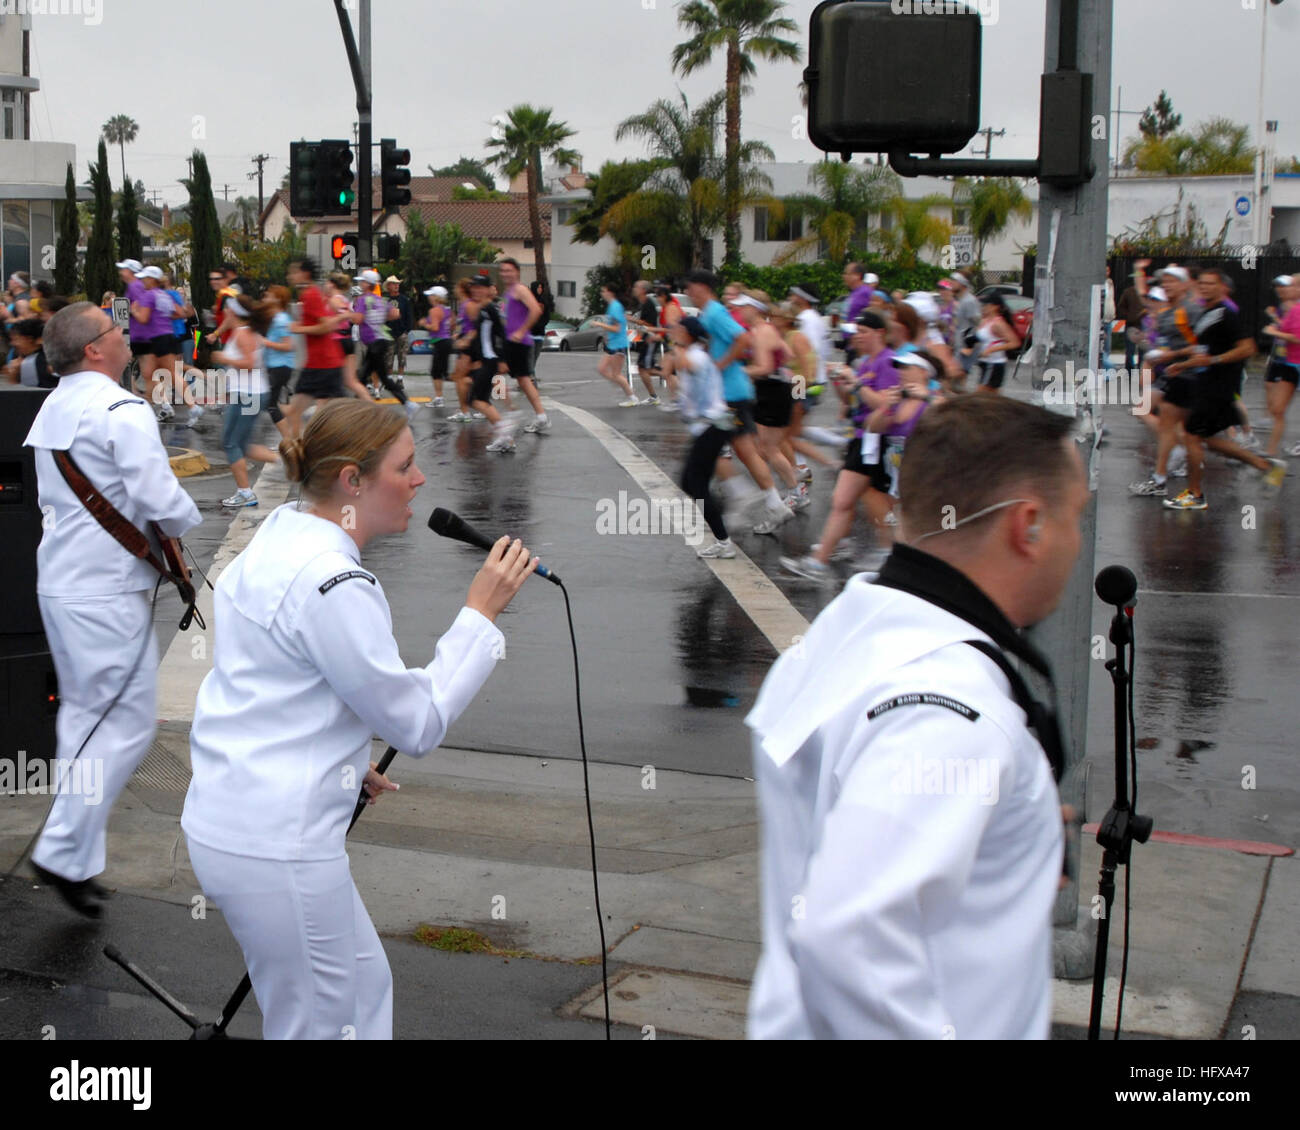 090531-N-4163T-014 SAN DIEGO (May 31, 2009) Members of the U.S. Navy Band Southwest 'Destroyers,' from Coronado, Calif., perform for participants of the 12th annual San Diego Rock 'n' Roll Marathon. (U.S. Navy photo by Mass Communication Specialist 2nd Class Stephanie Tigner/Released) US Navy 090531-N-4163T-014 Members of the U.S. Navy Band Southwest Stock Photo